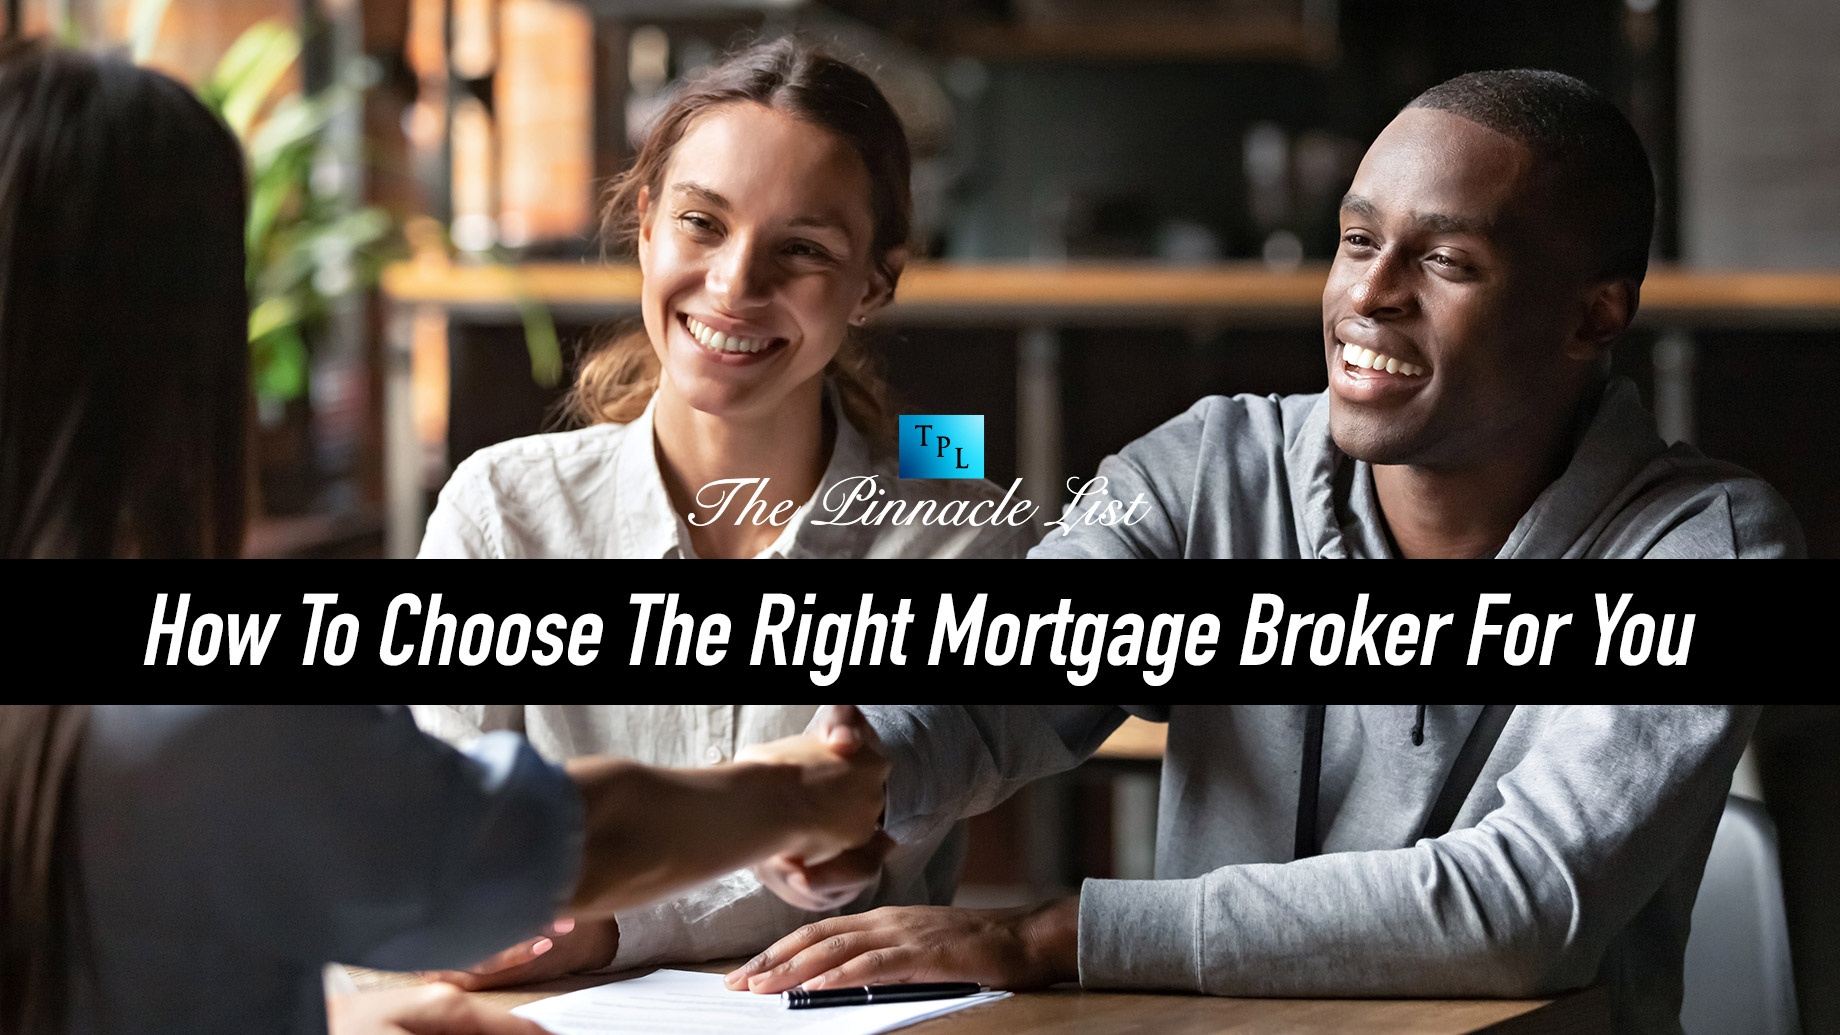 How To Choose The Right Mortgage Broker For You